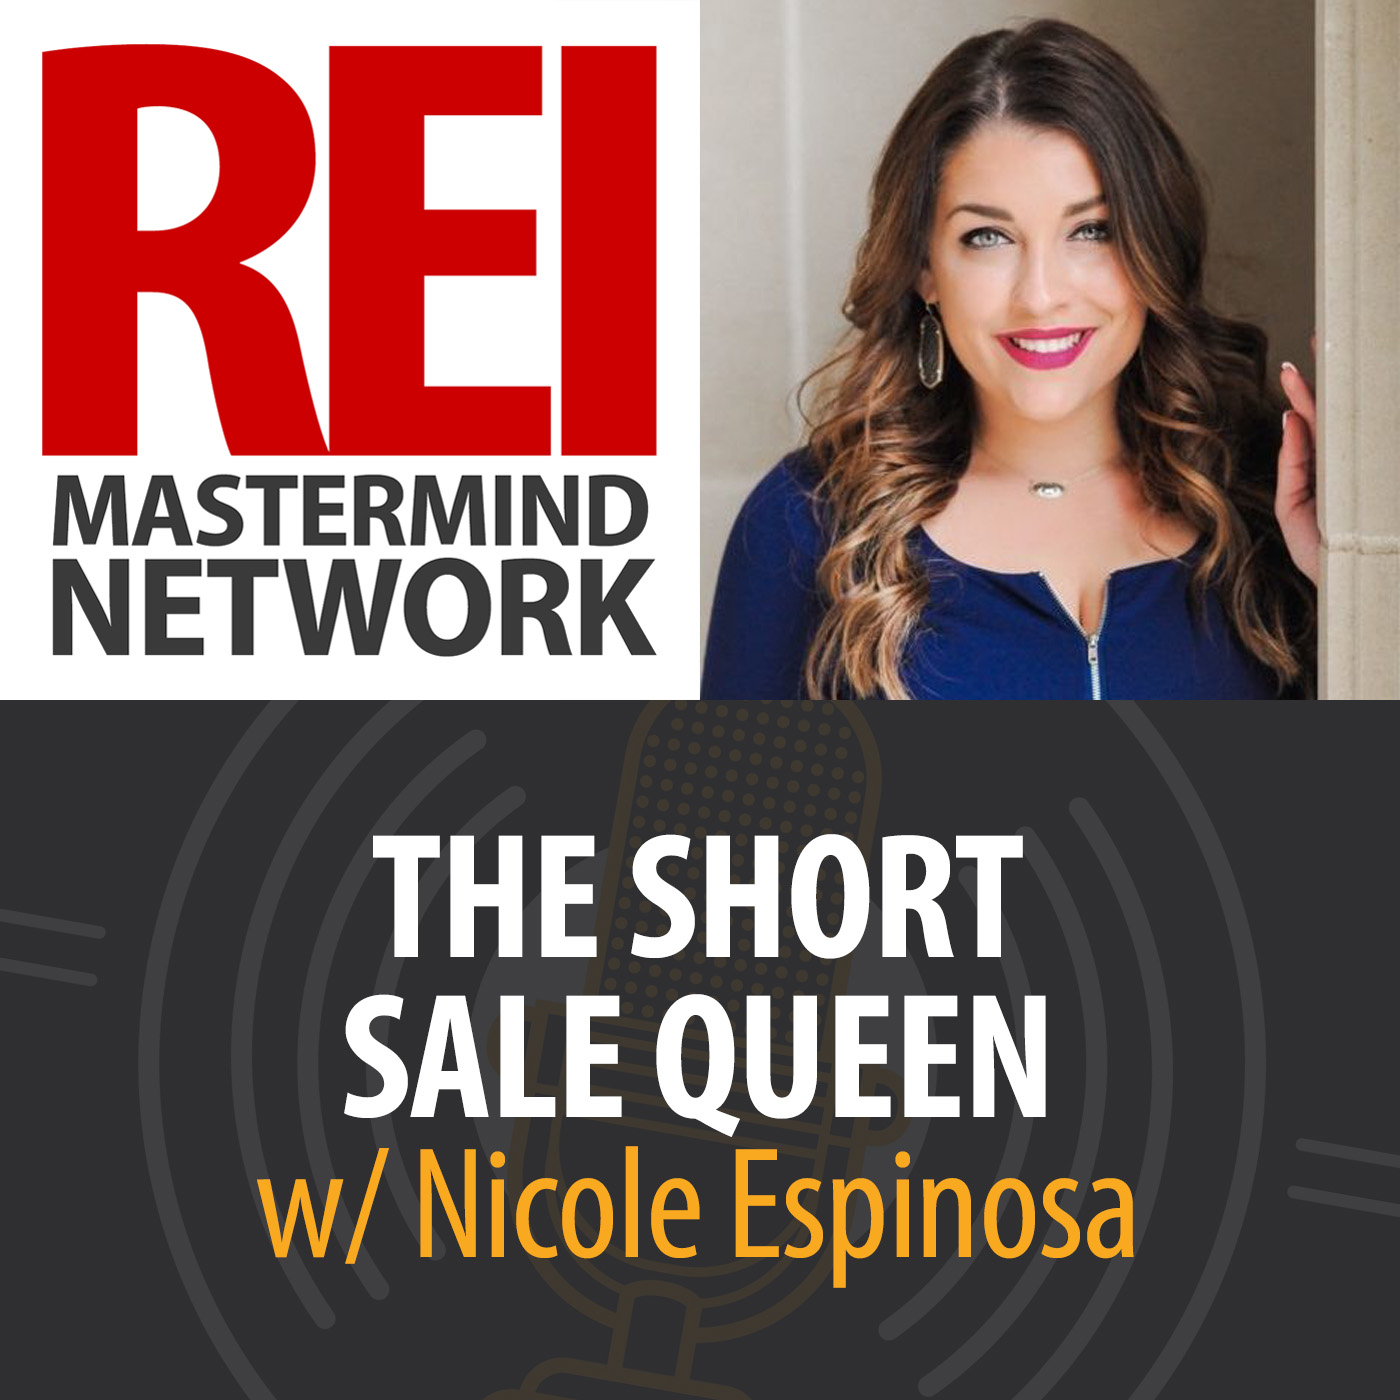 The Short Sale Queen with Nicole Espinosa